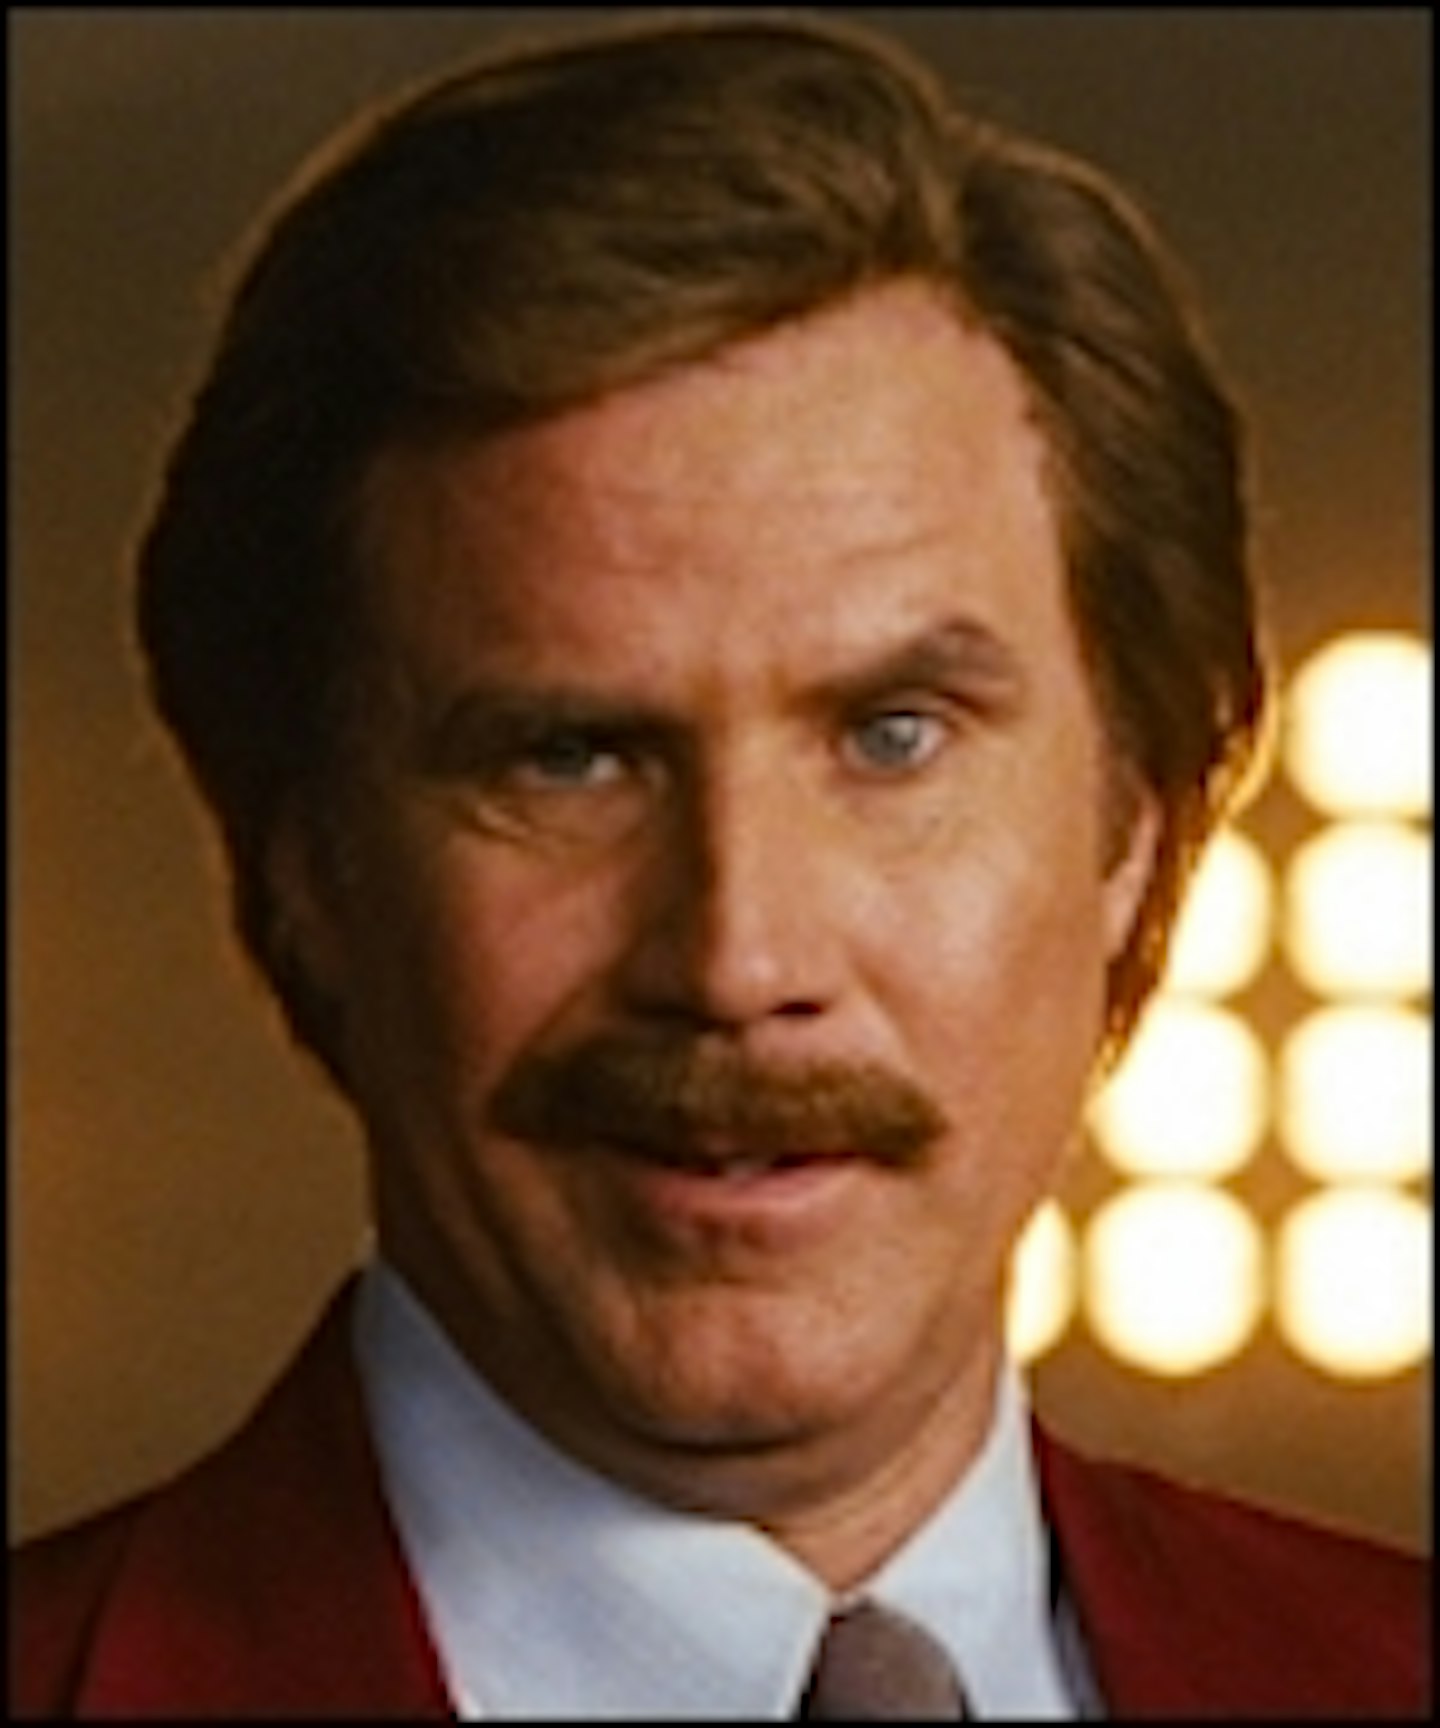 Two New Anchorman: The Legend Continues Clips